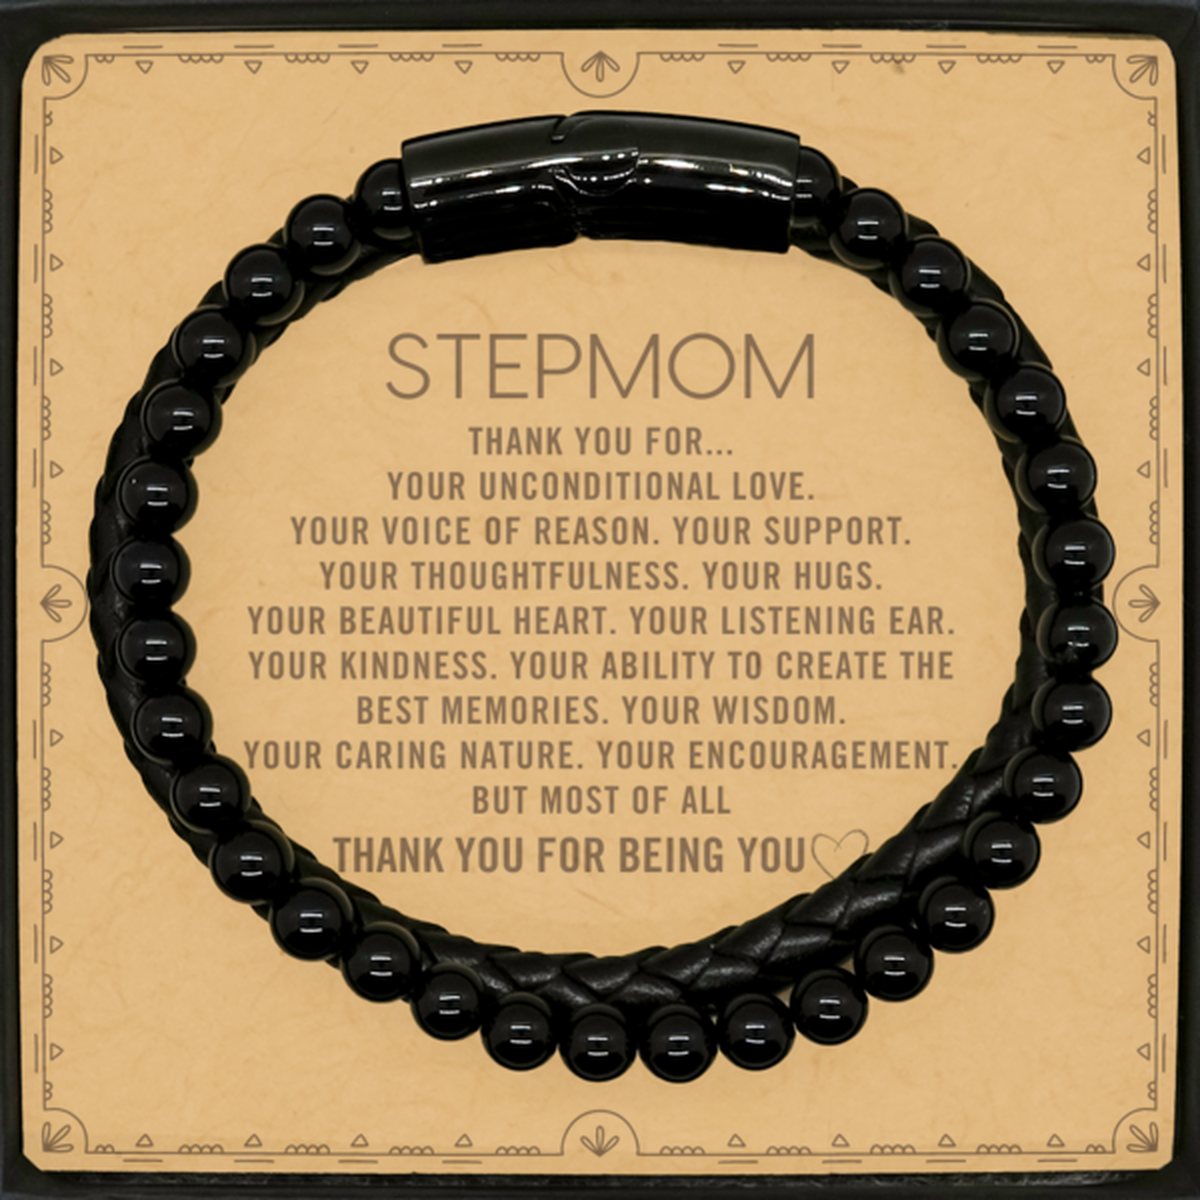 Stepmom Stone Leather Bracelets Custom, Message Card Gifts For Stepmom Christmas Graduation Birthday Gifts for Men Women Stepmom Thank you for Your unconditional love